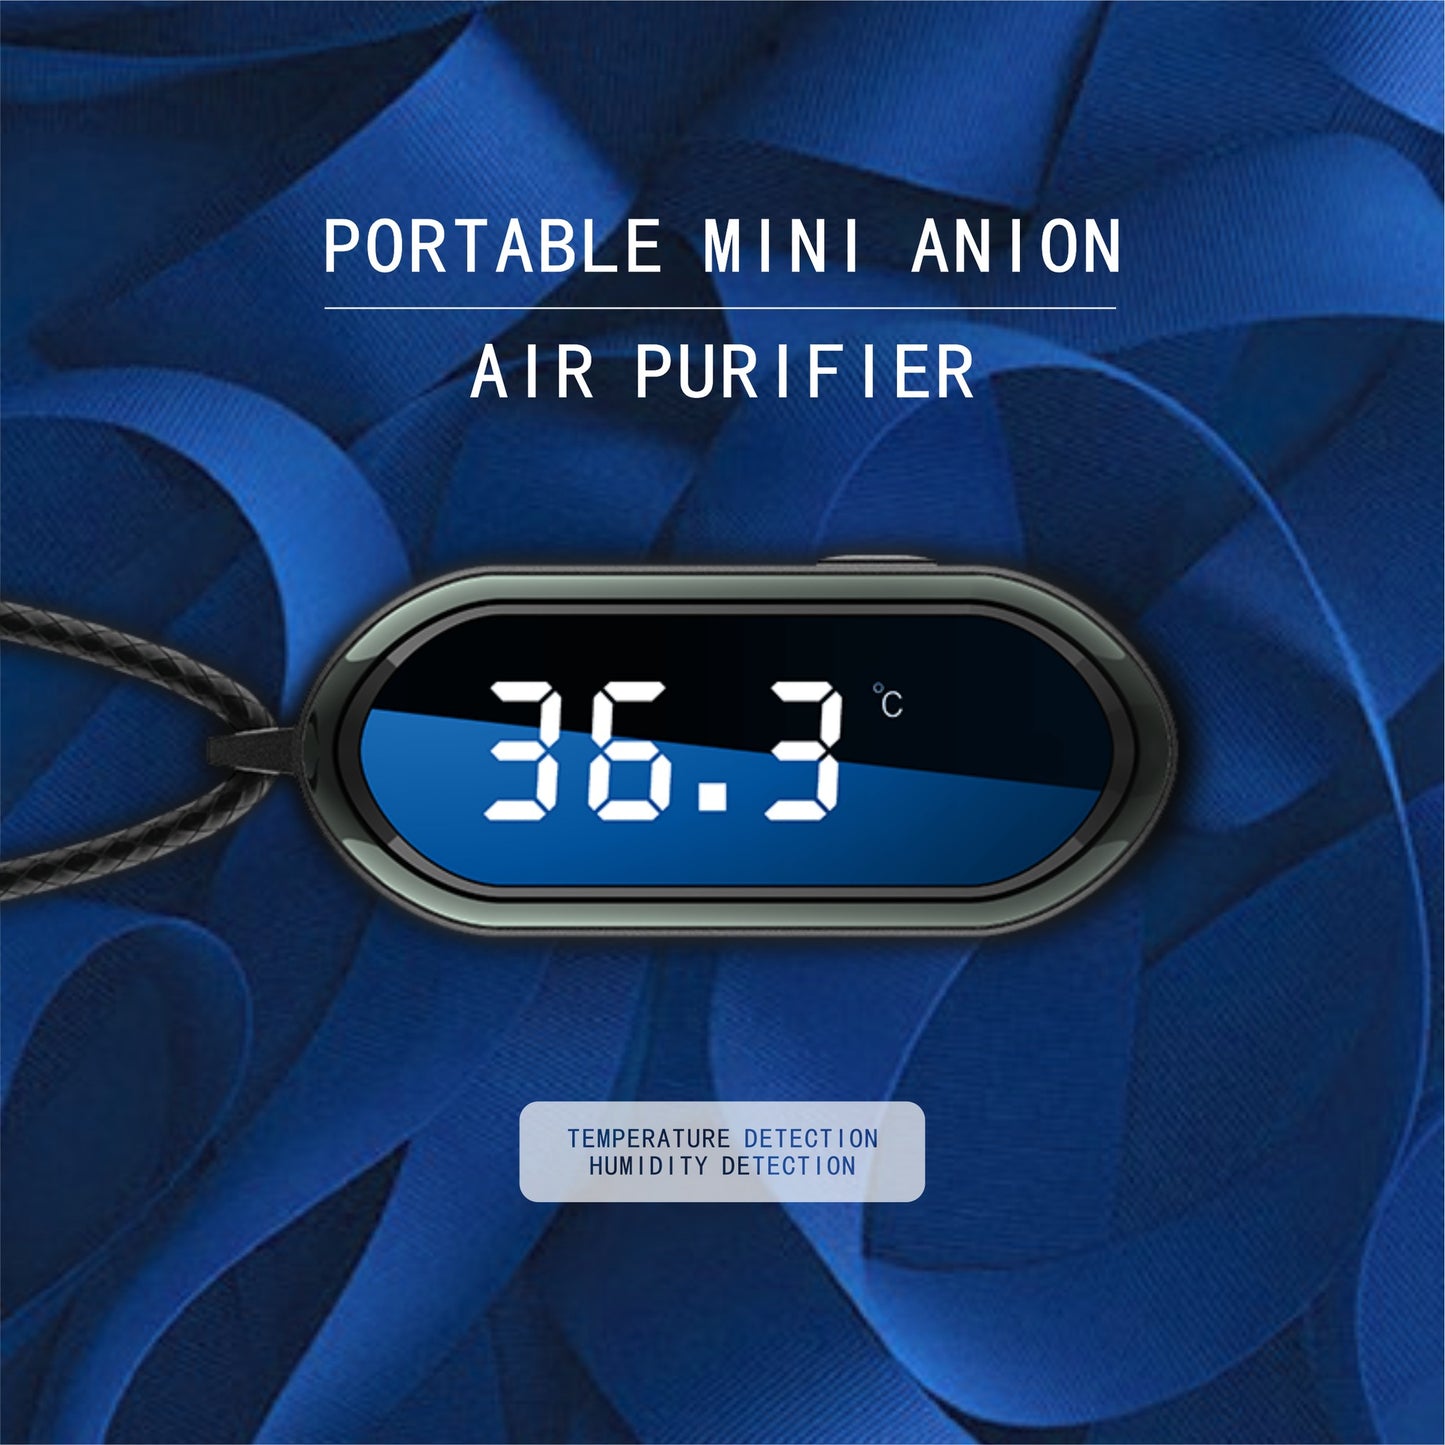 Air Purifier Is Portable And Wears Negative Ions